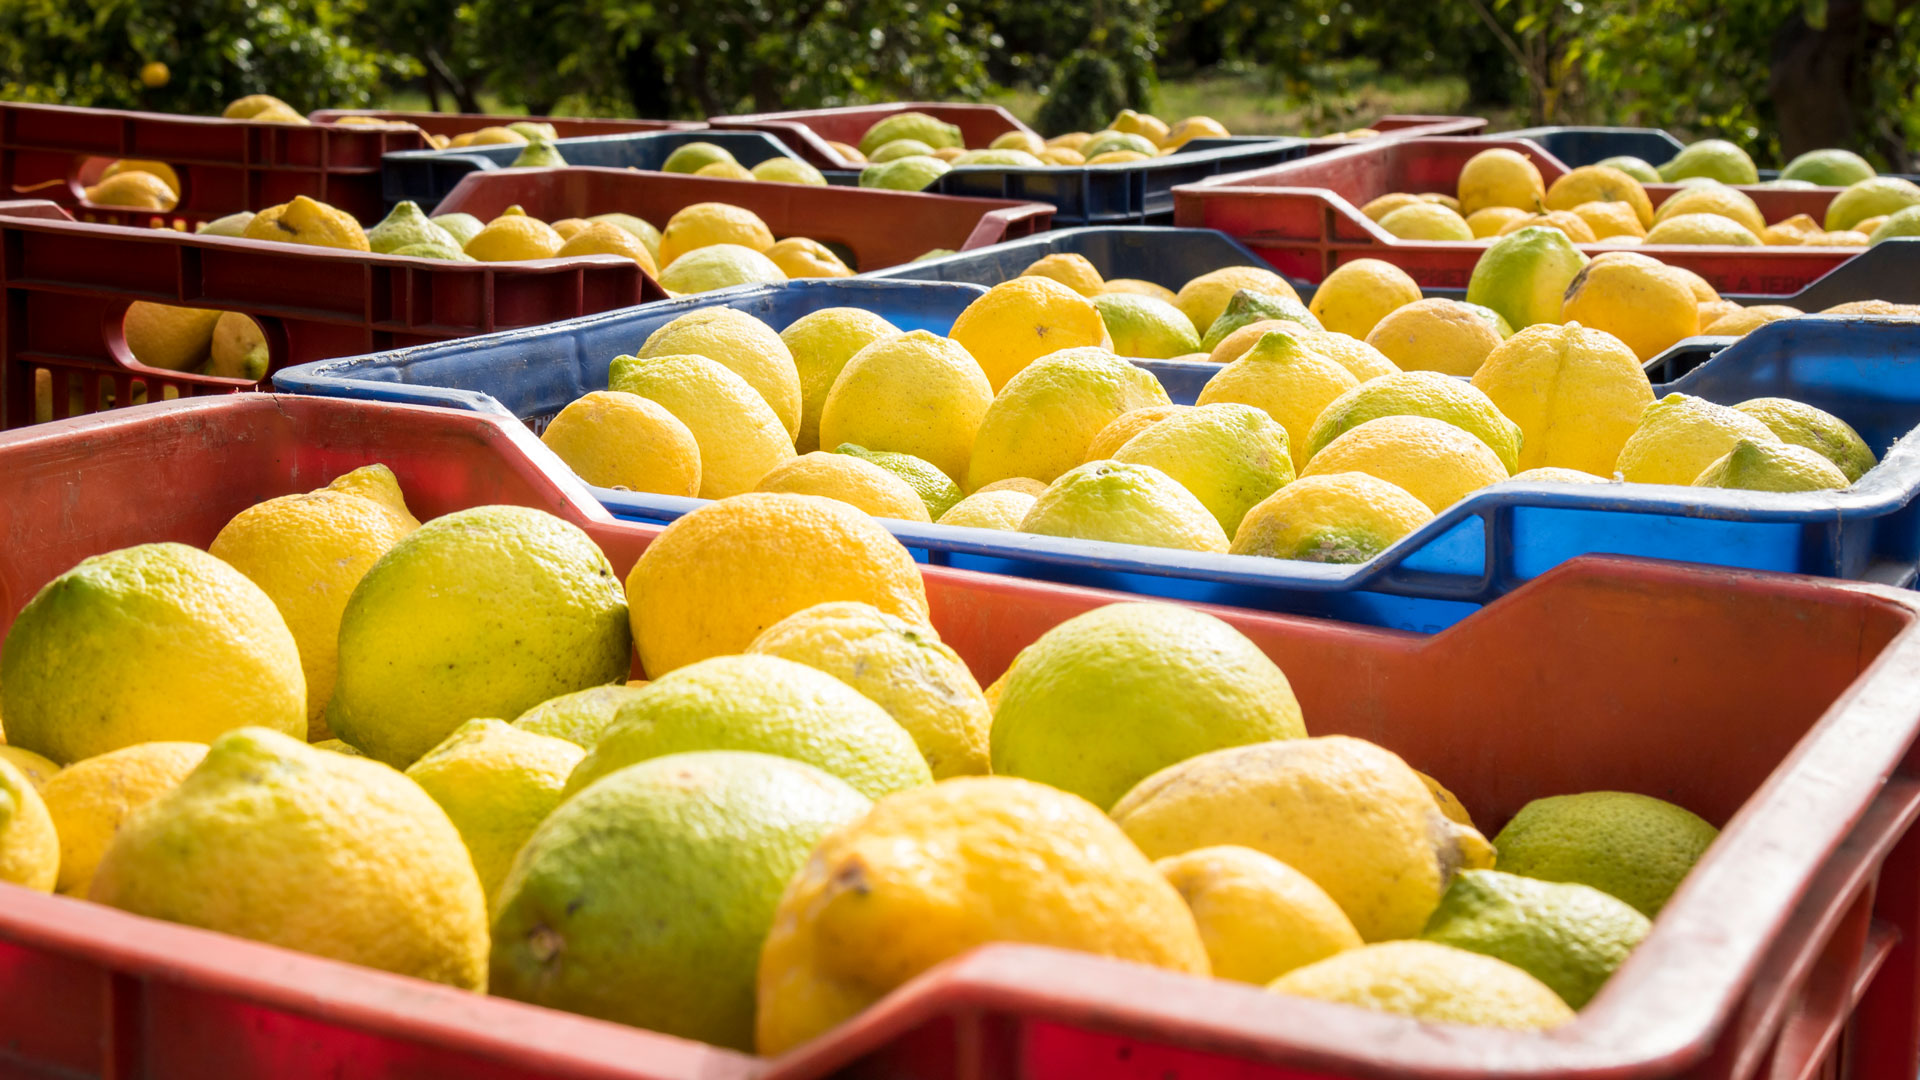 The citrus industry also demands a differential exchange rate due to the loss of competitiveness